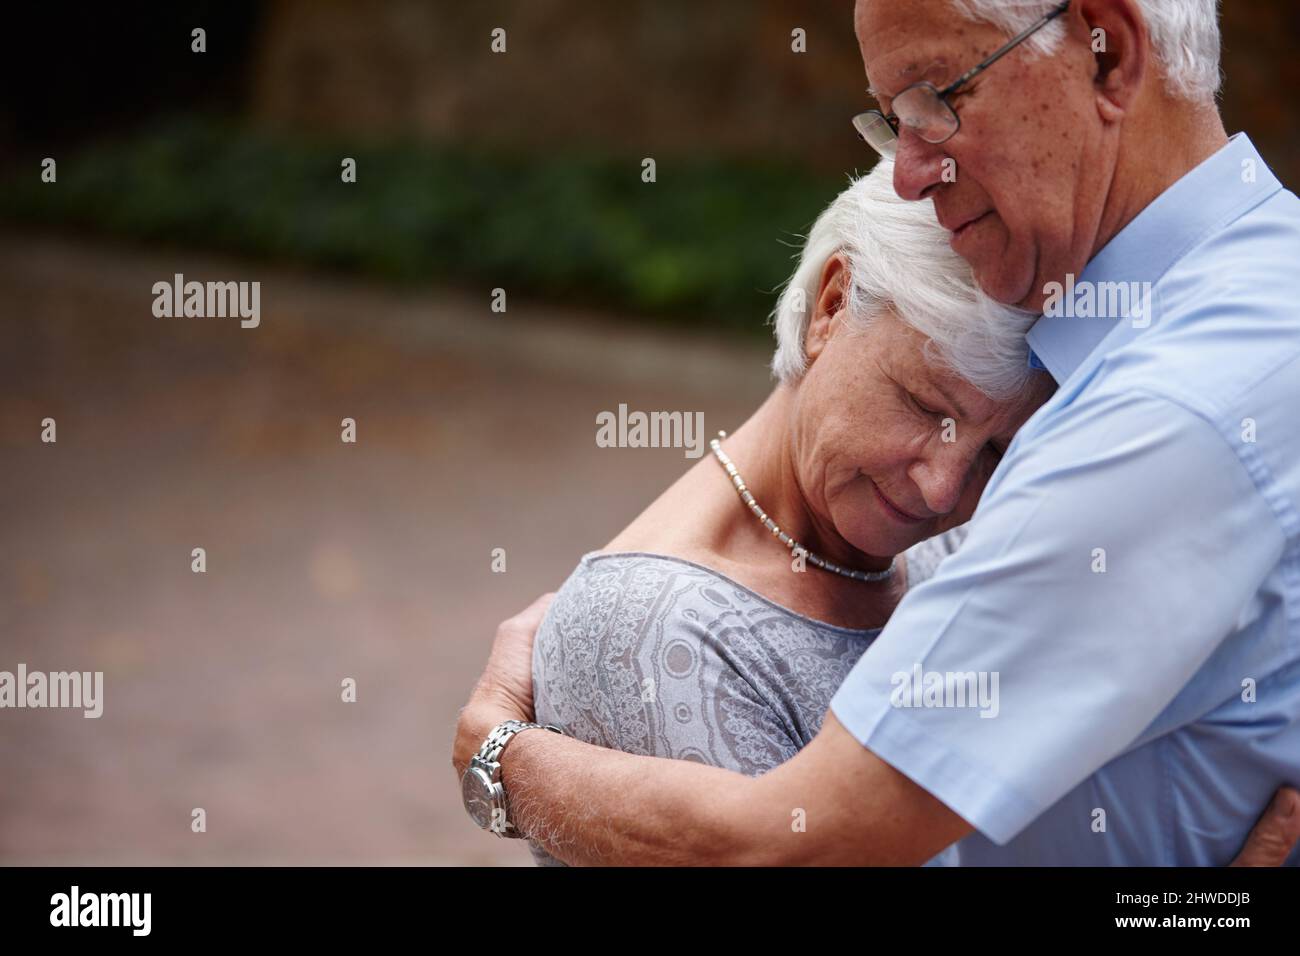 Marriage doesnt have to be perfect to be beautiful. Shot of a senior man consoling his wife. Stock Photo